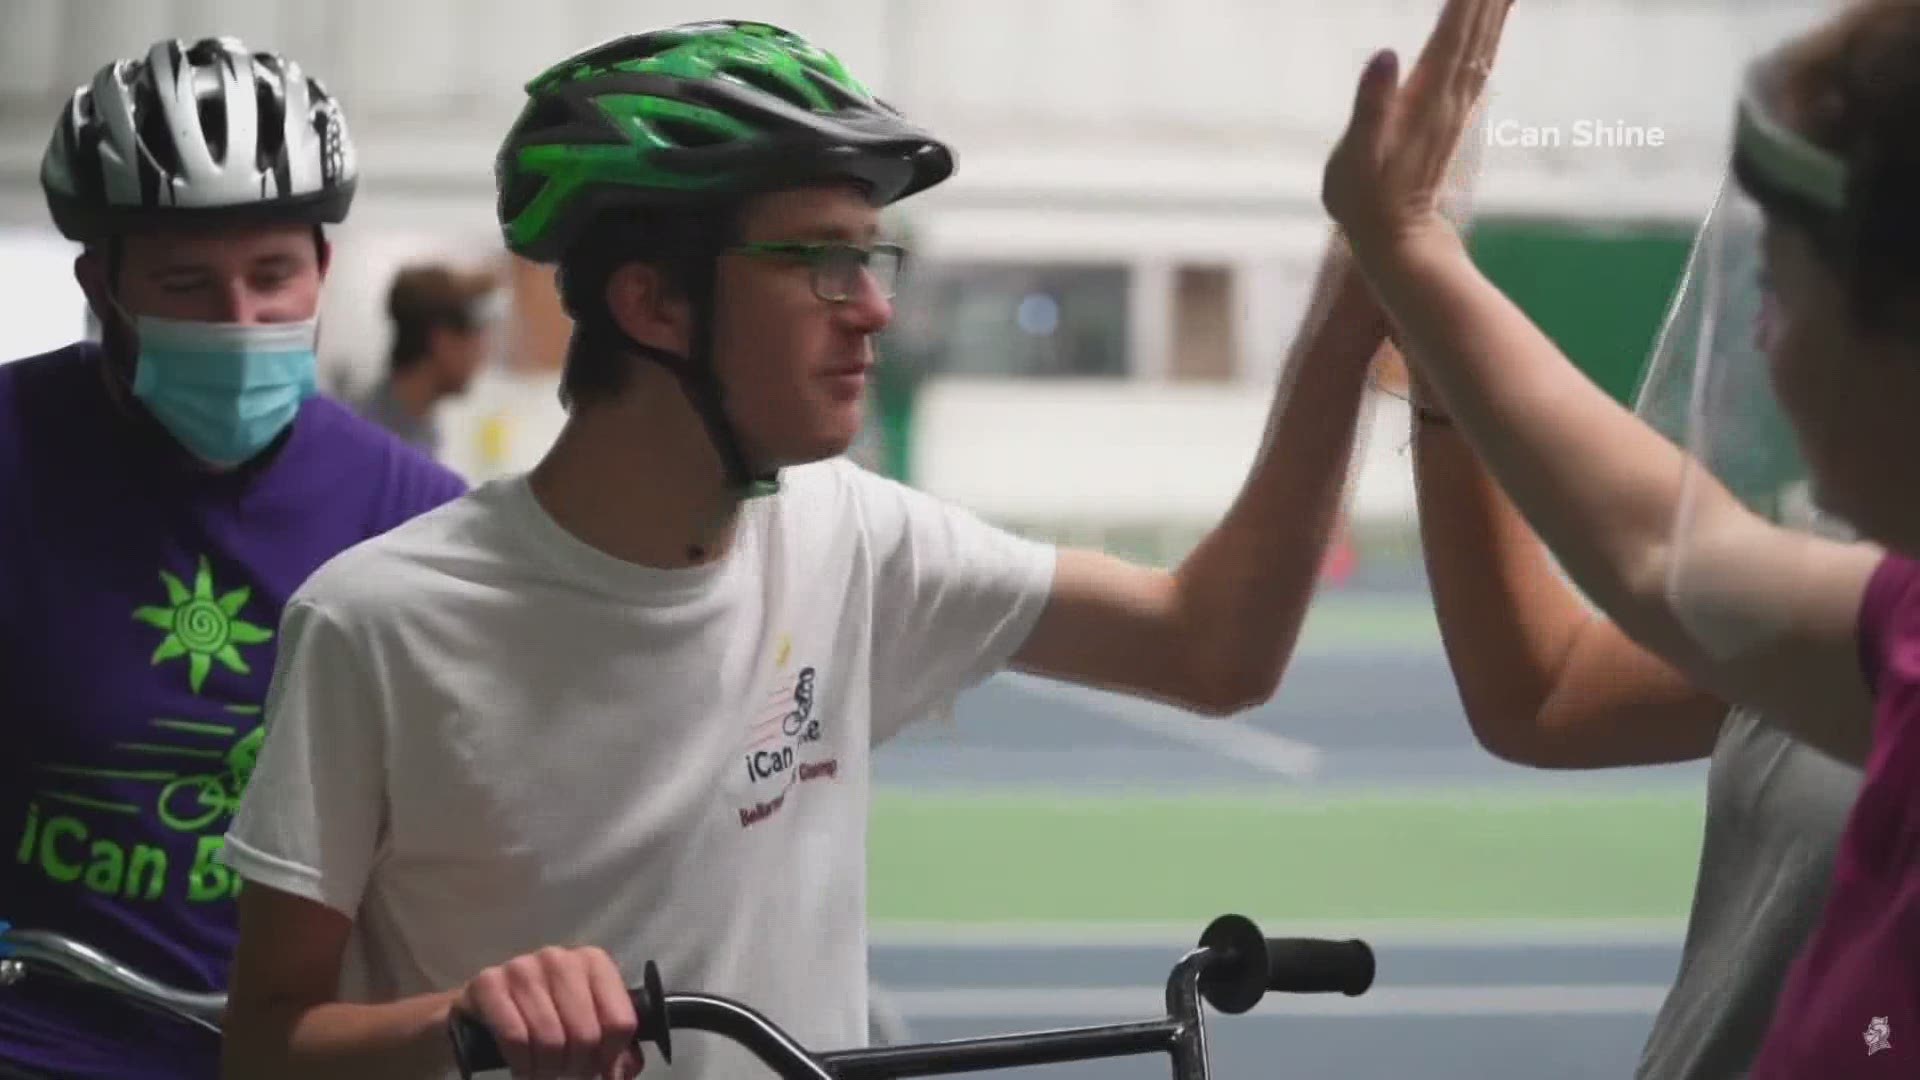 Developed by the nonprofit iCan Shine, more than 20,000 individuals with disabilities worldwide have learned to ride since its founding 14 years ago.